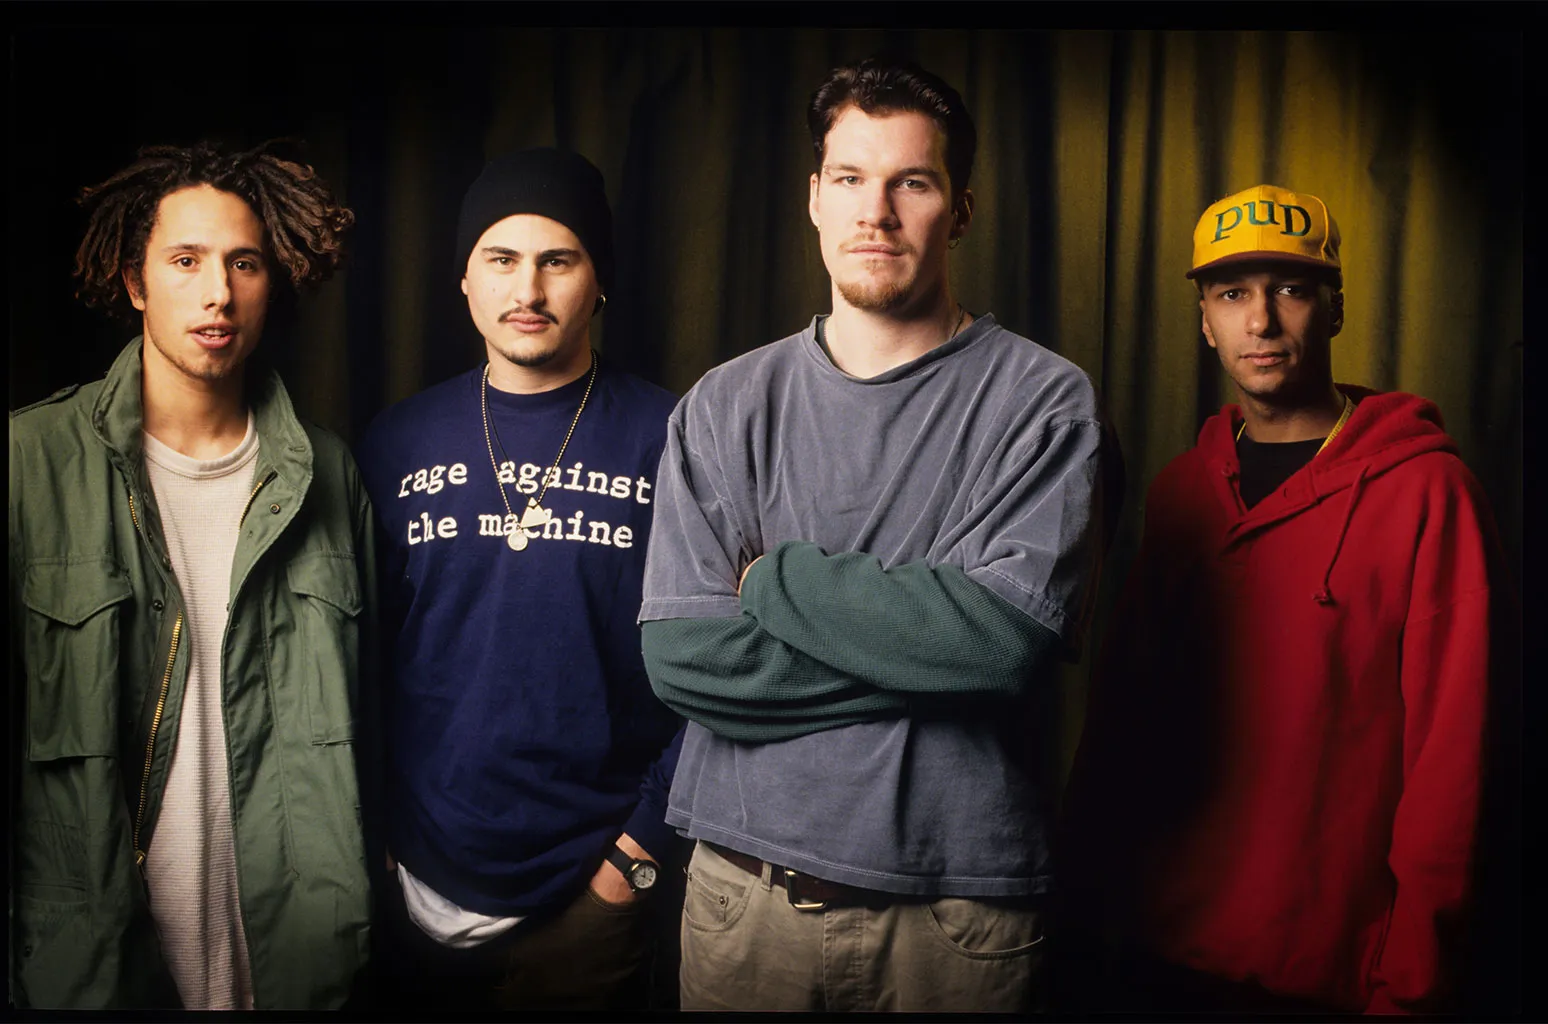 why did Rage Against The Machine break up